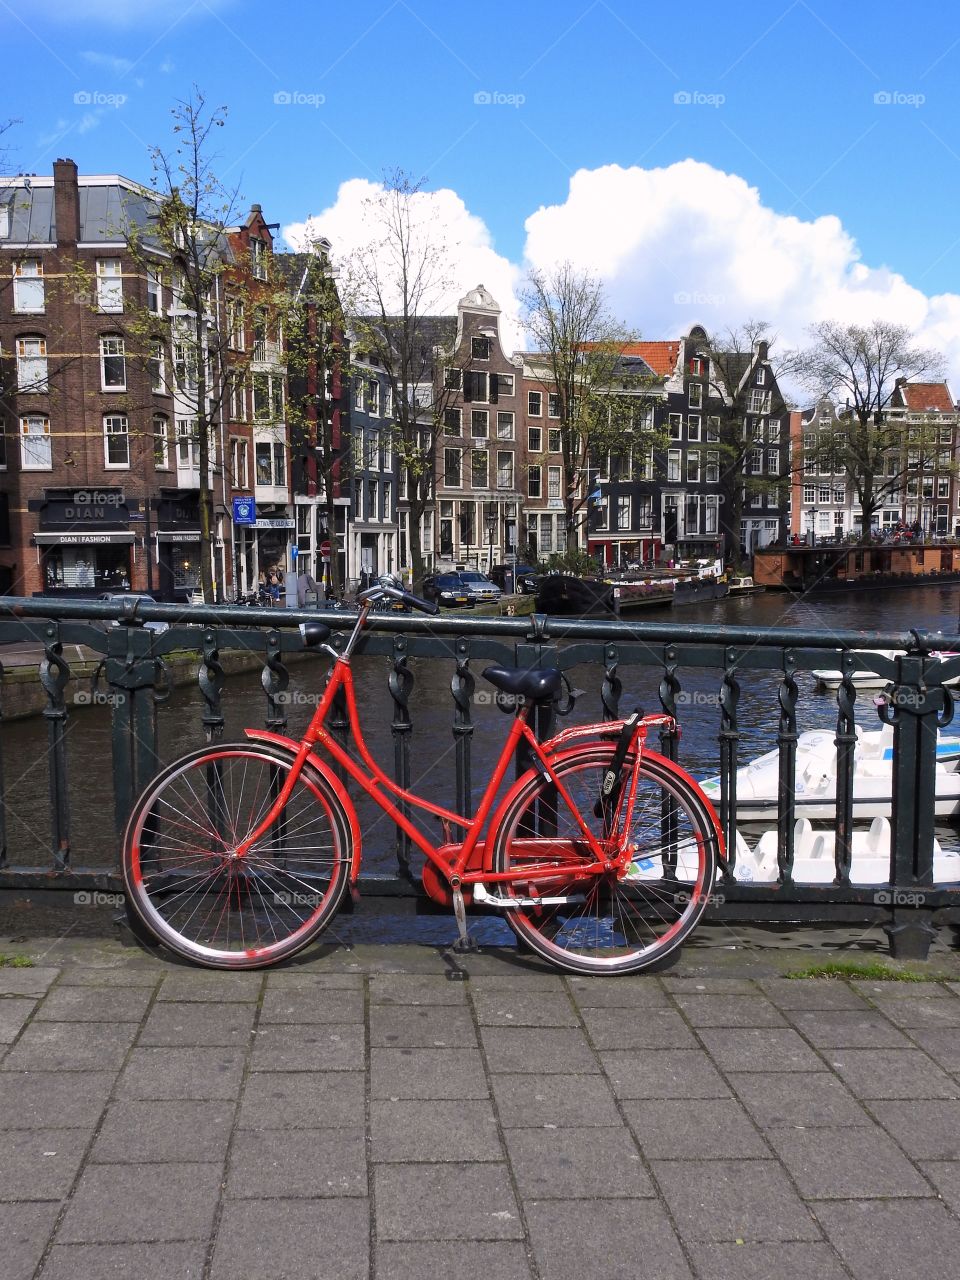 Red bike by a canal in Amsterdam 